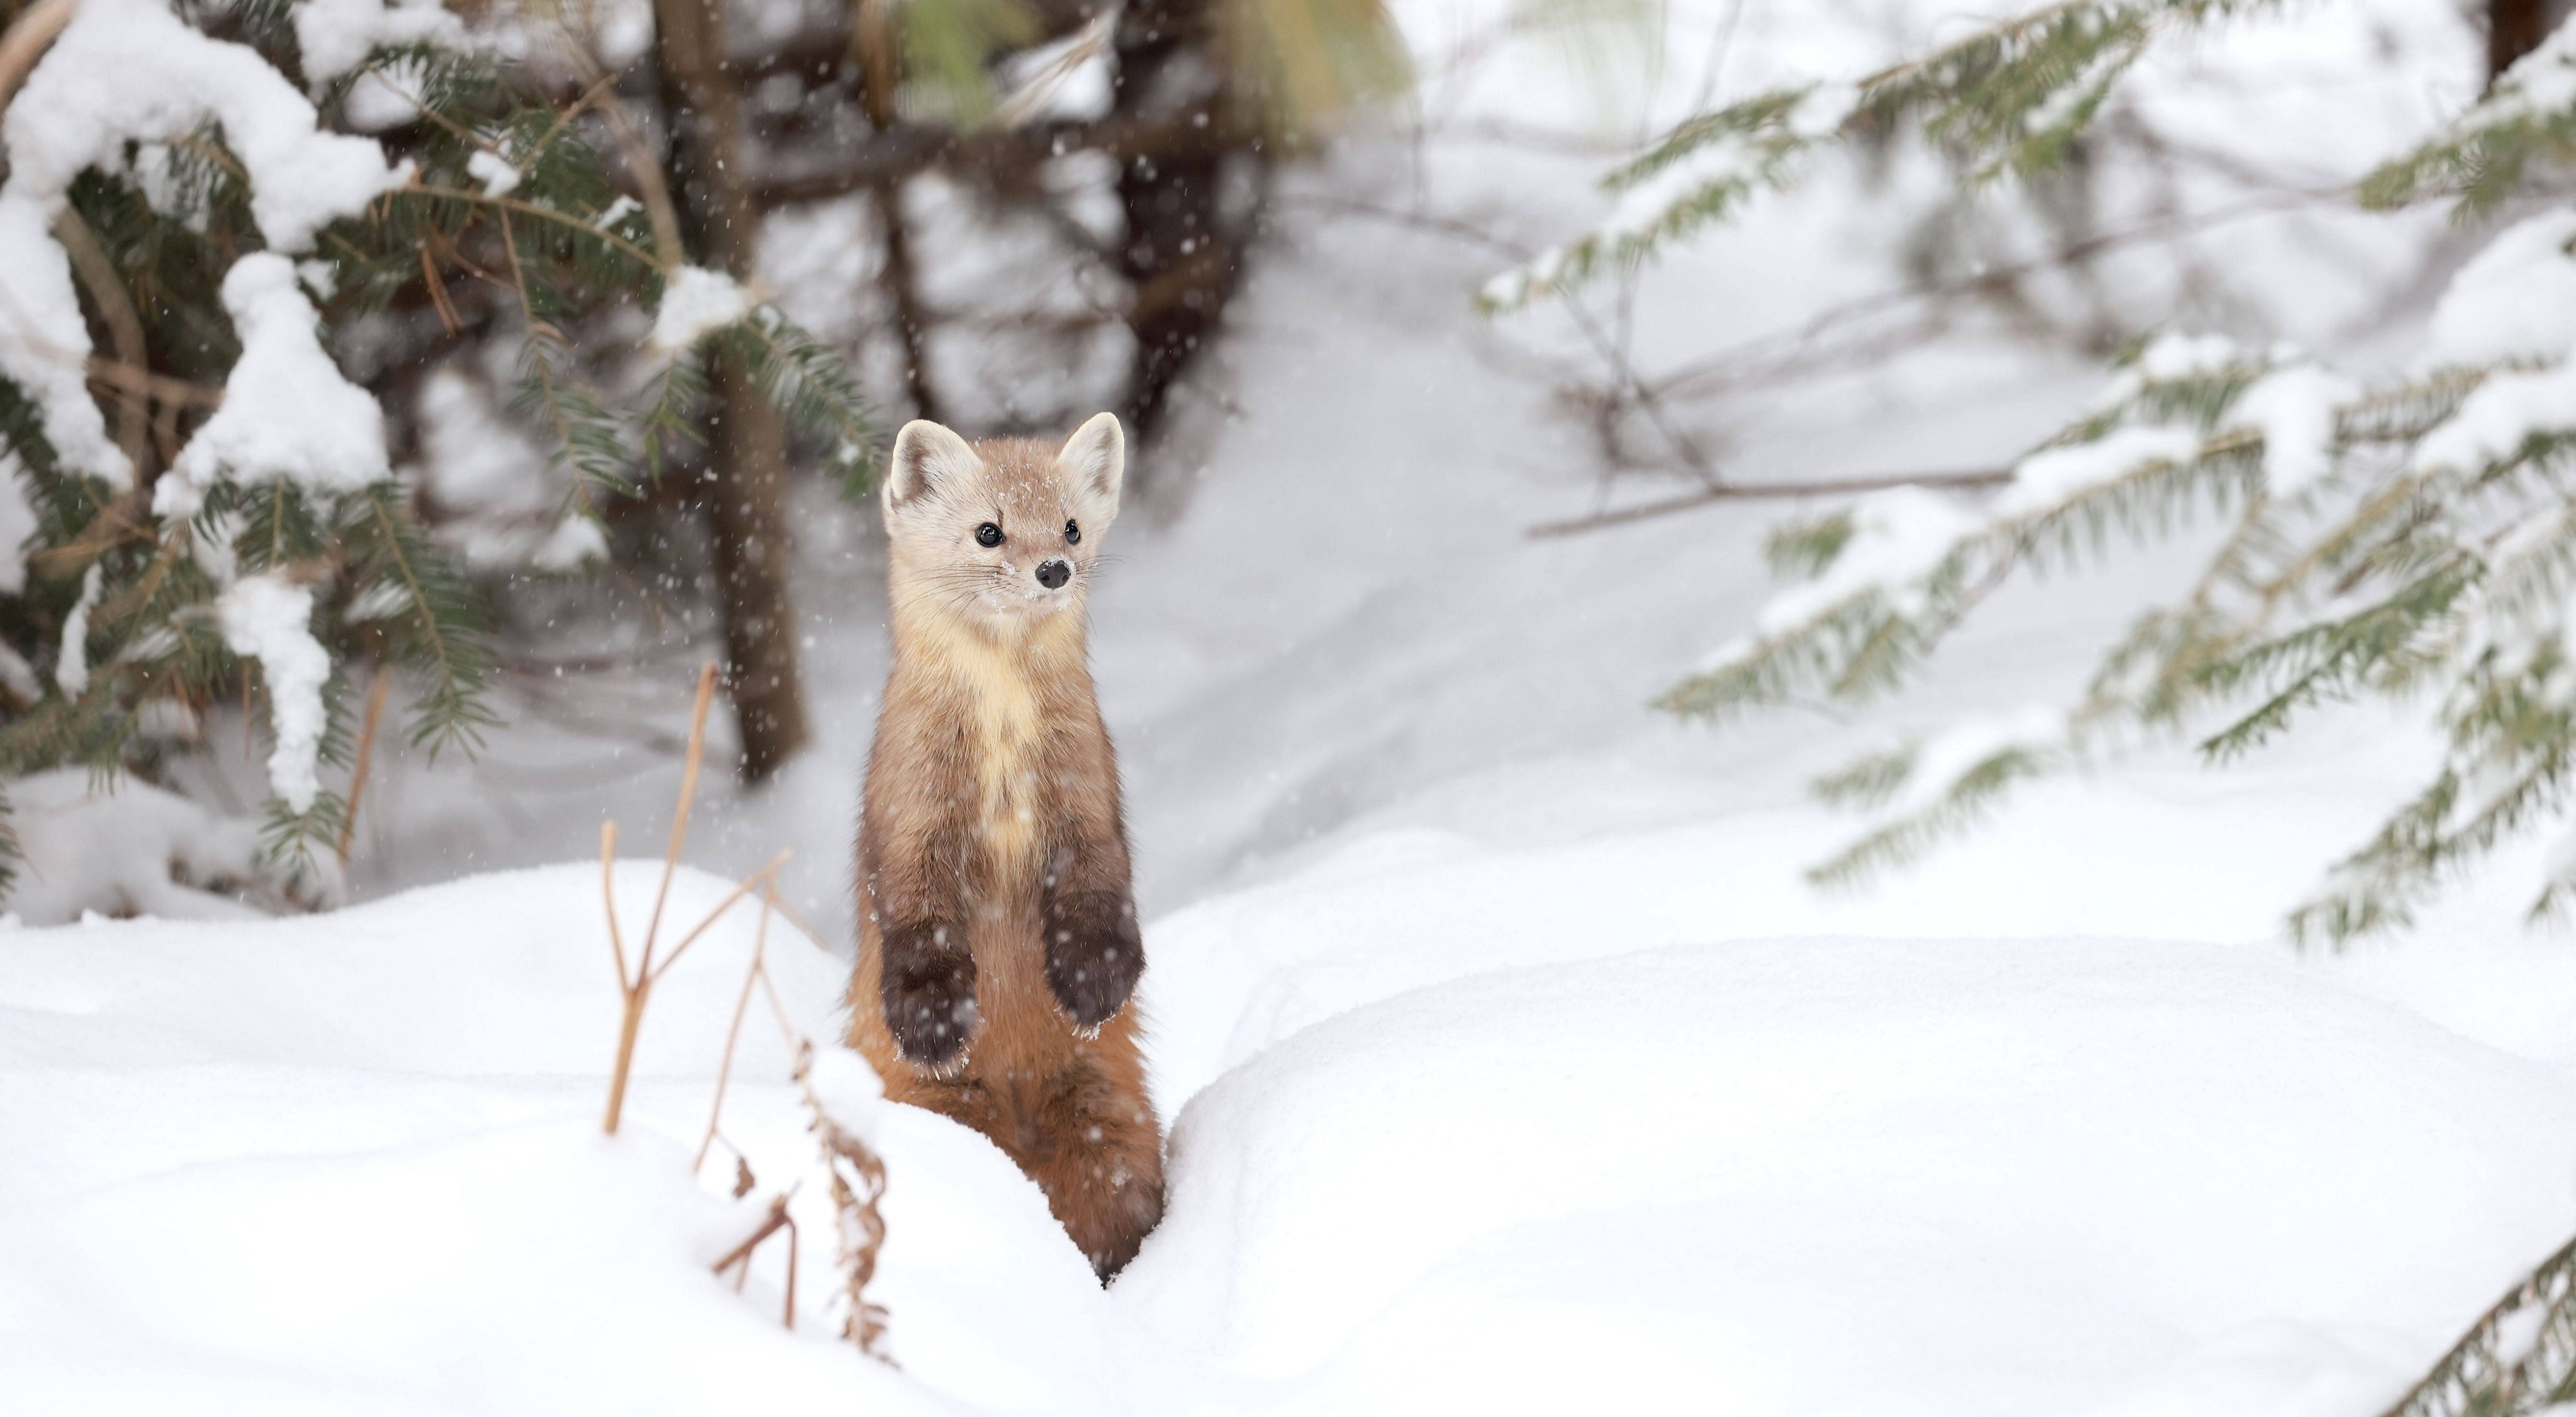 an American marten standing in the snow.